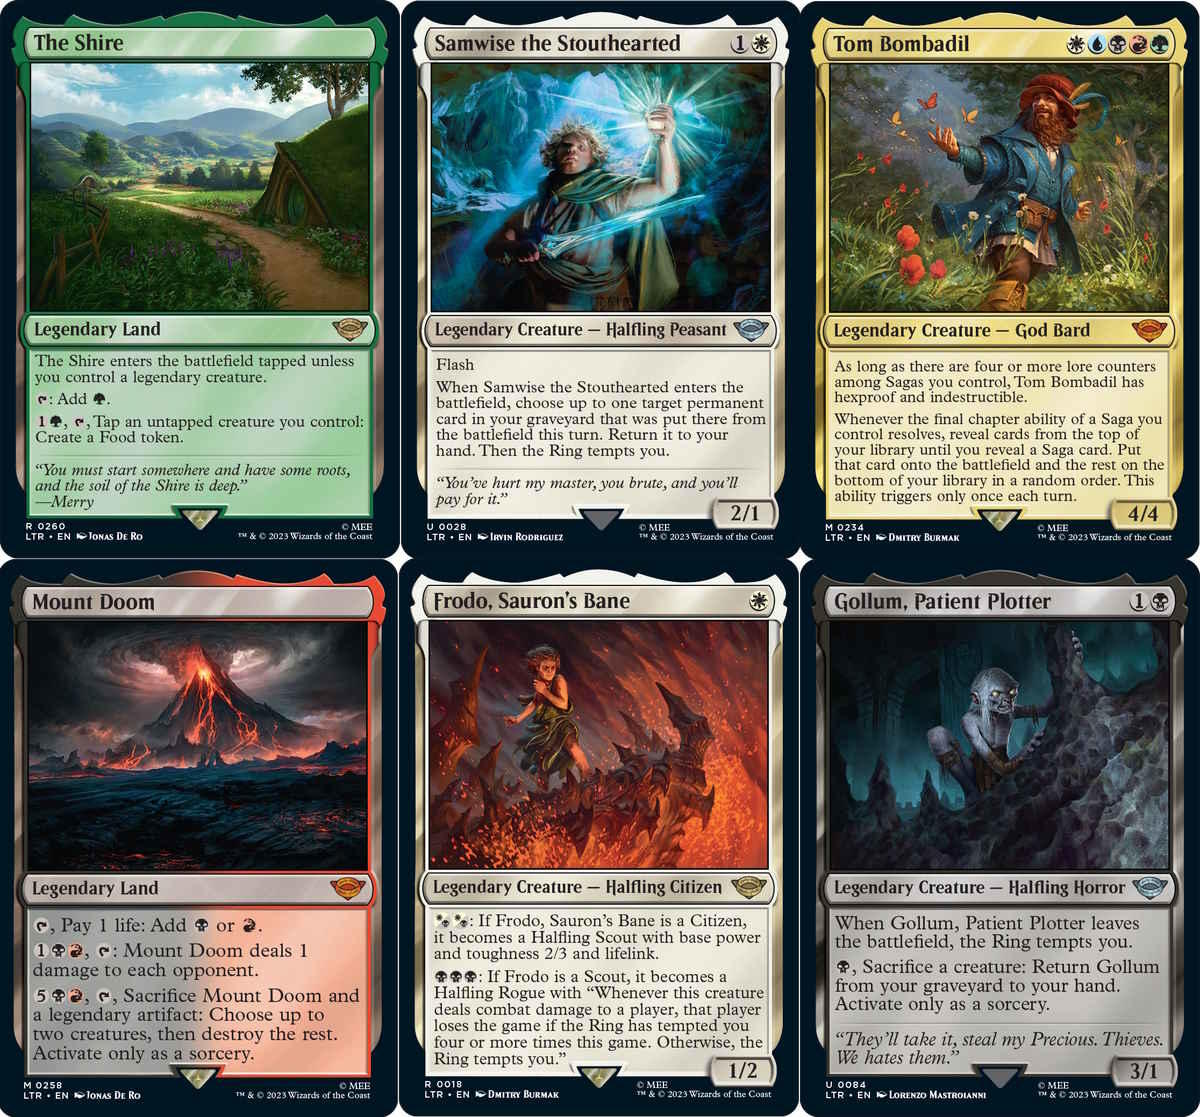 magic-the-gathering-lord-of-the-rings-cards-spoilers.jpg